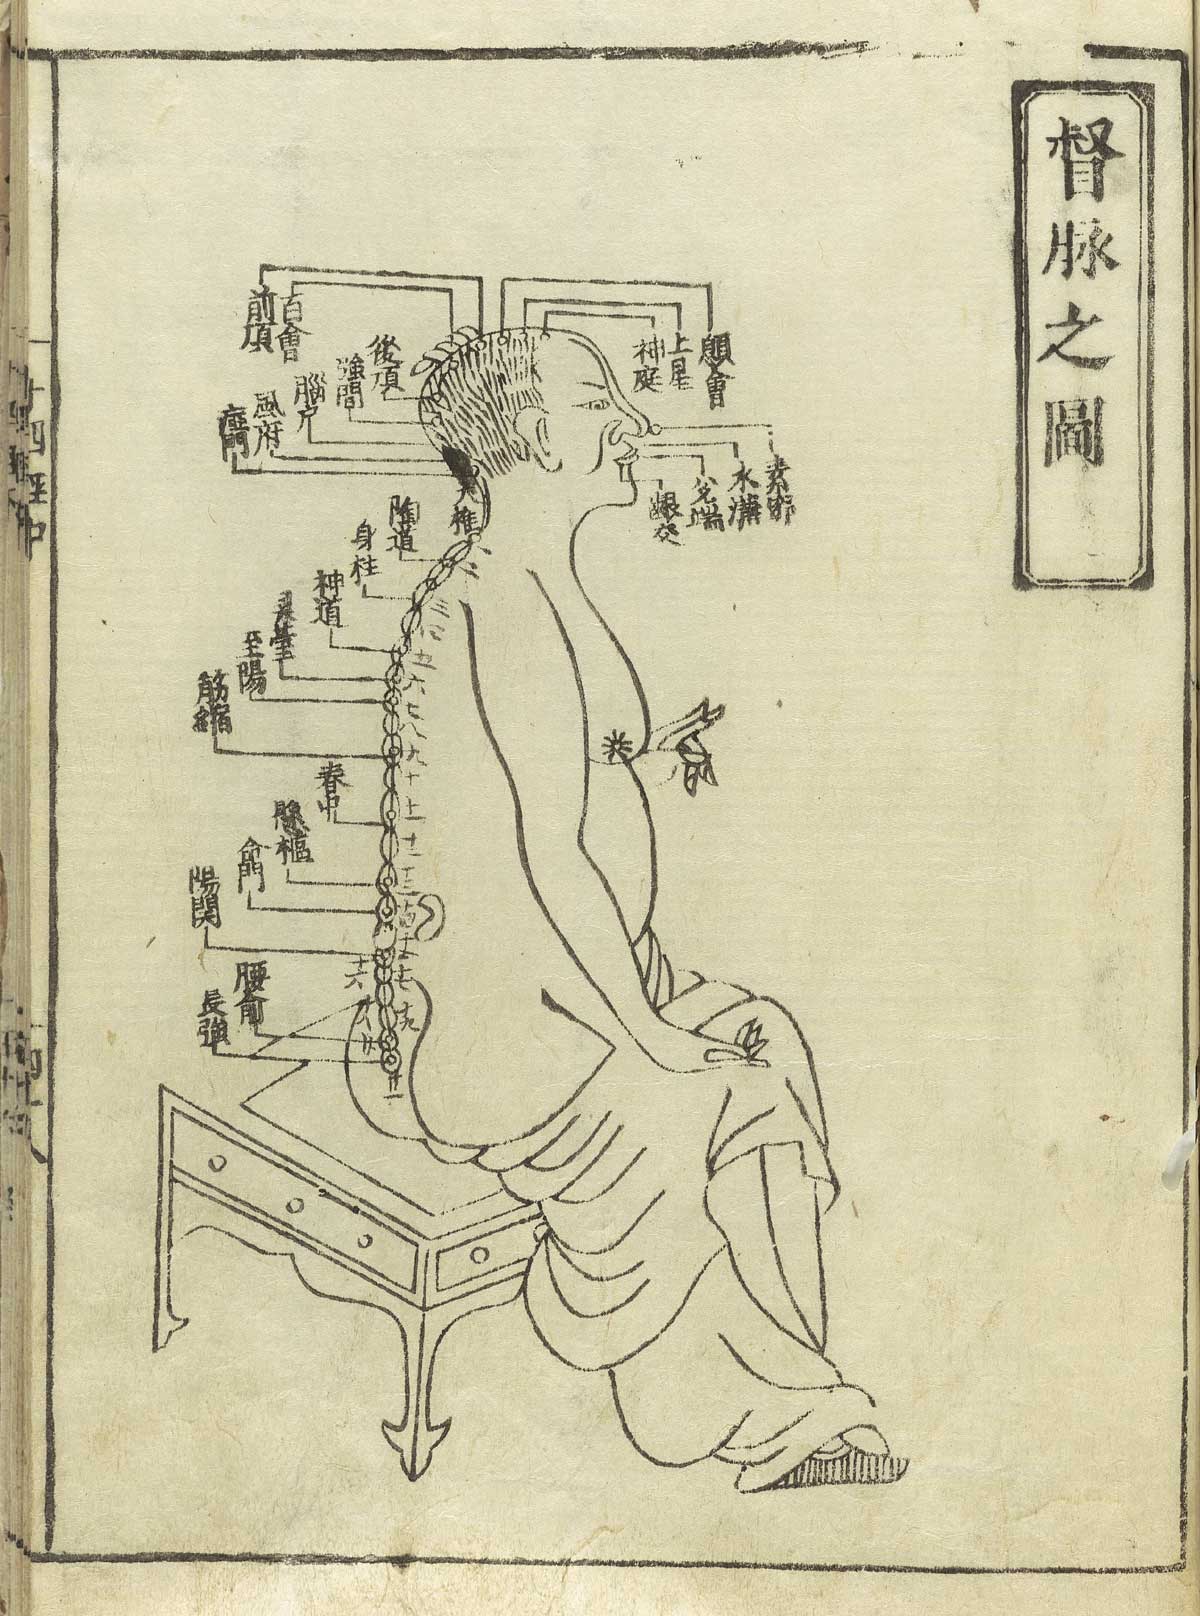 Woodcut showing the governing vessel of a seated male figure in profile wearing a loin cloth with meridians indicated down the face and back with Chinese characters giving names of the points, from Hua Shou’s Jushikei hakki, NLM Call no.: WZ 260 H868s 1716.